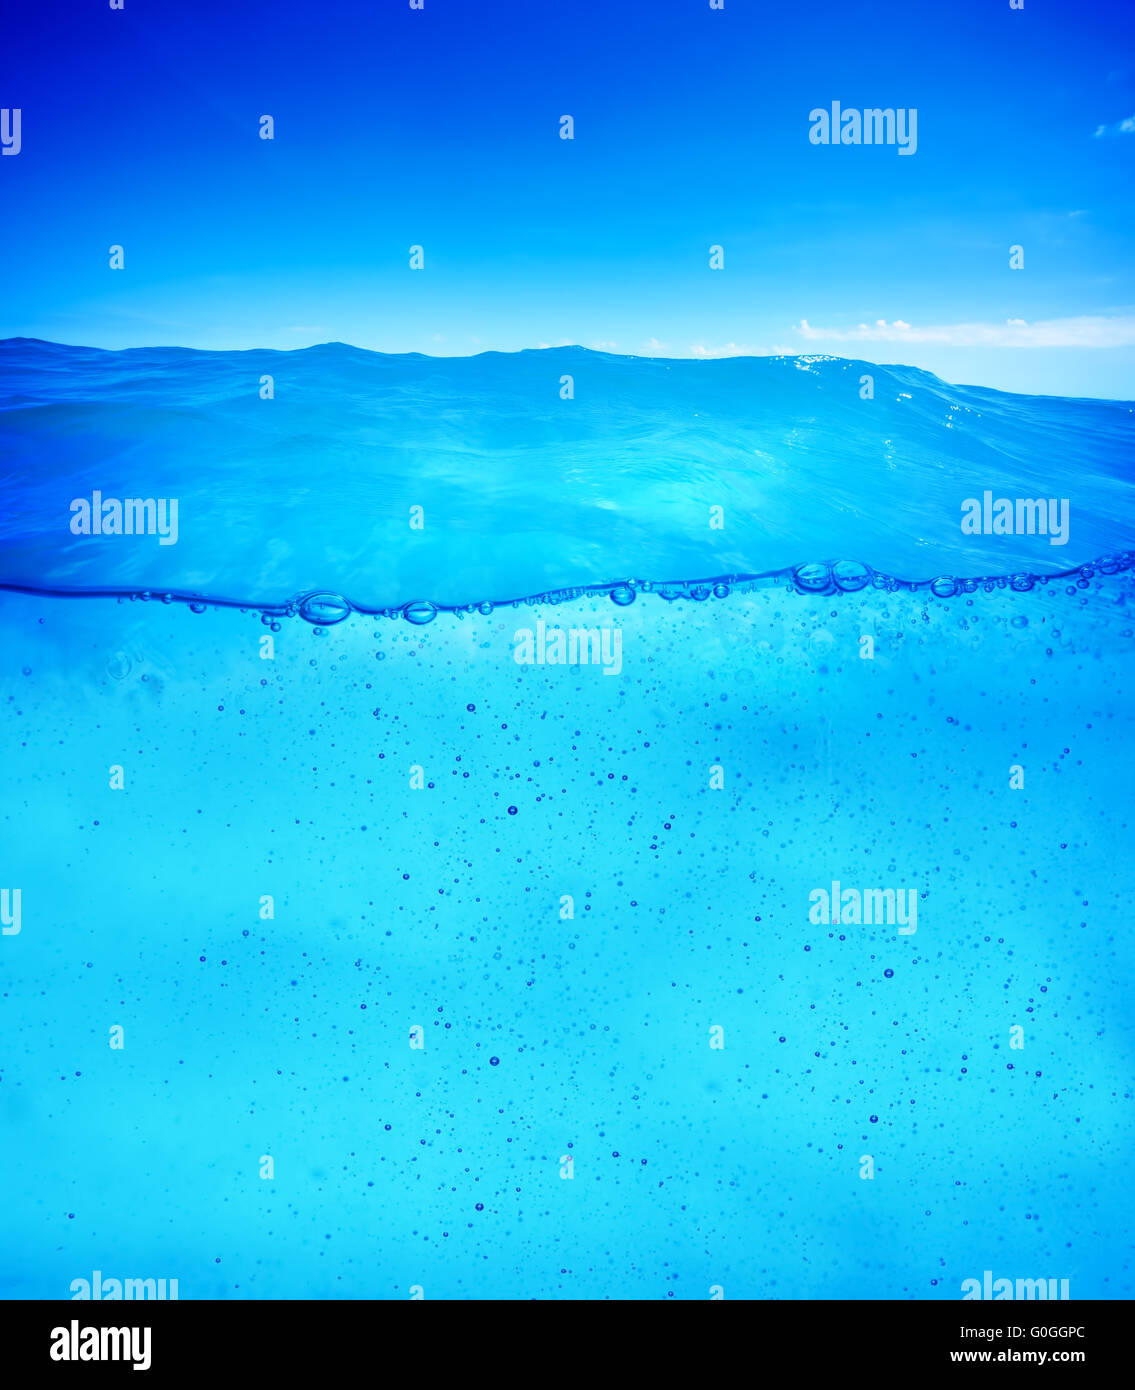 Underwater background ready for design. Clean and clear waterline Stock Photo